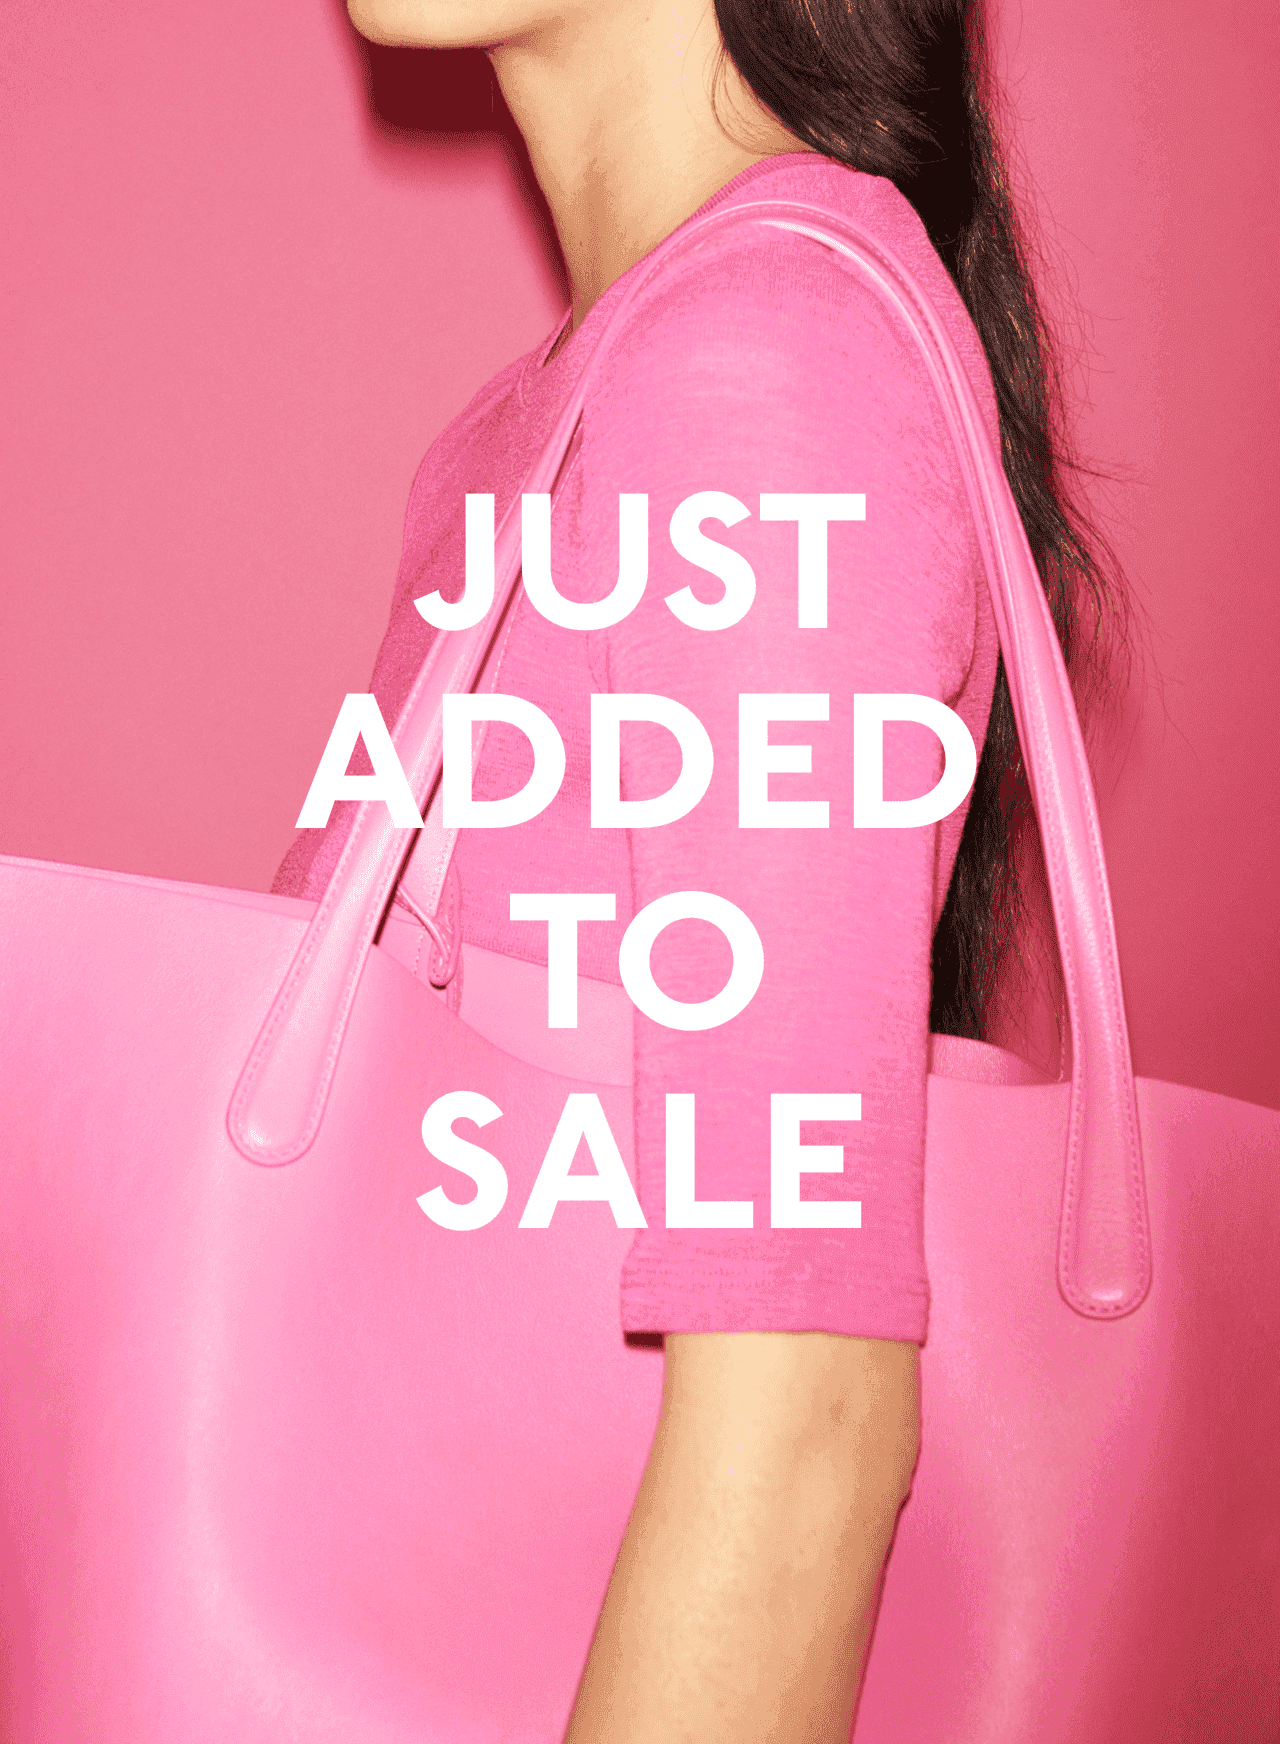 New styles just added to sale.